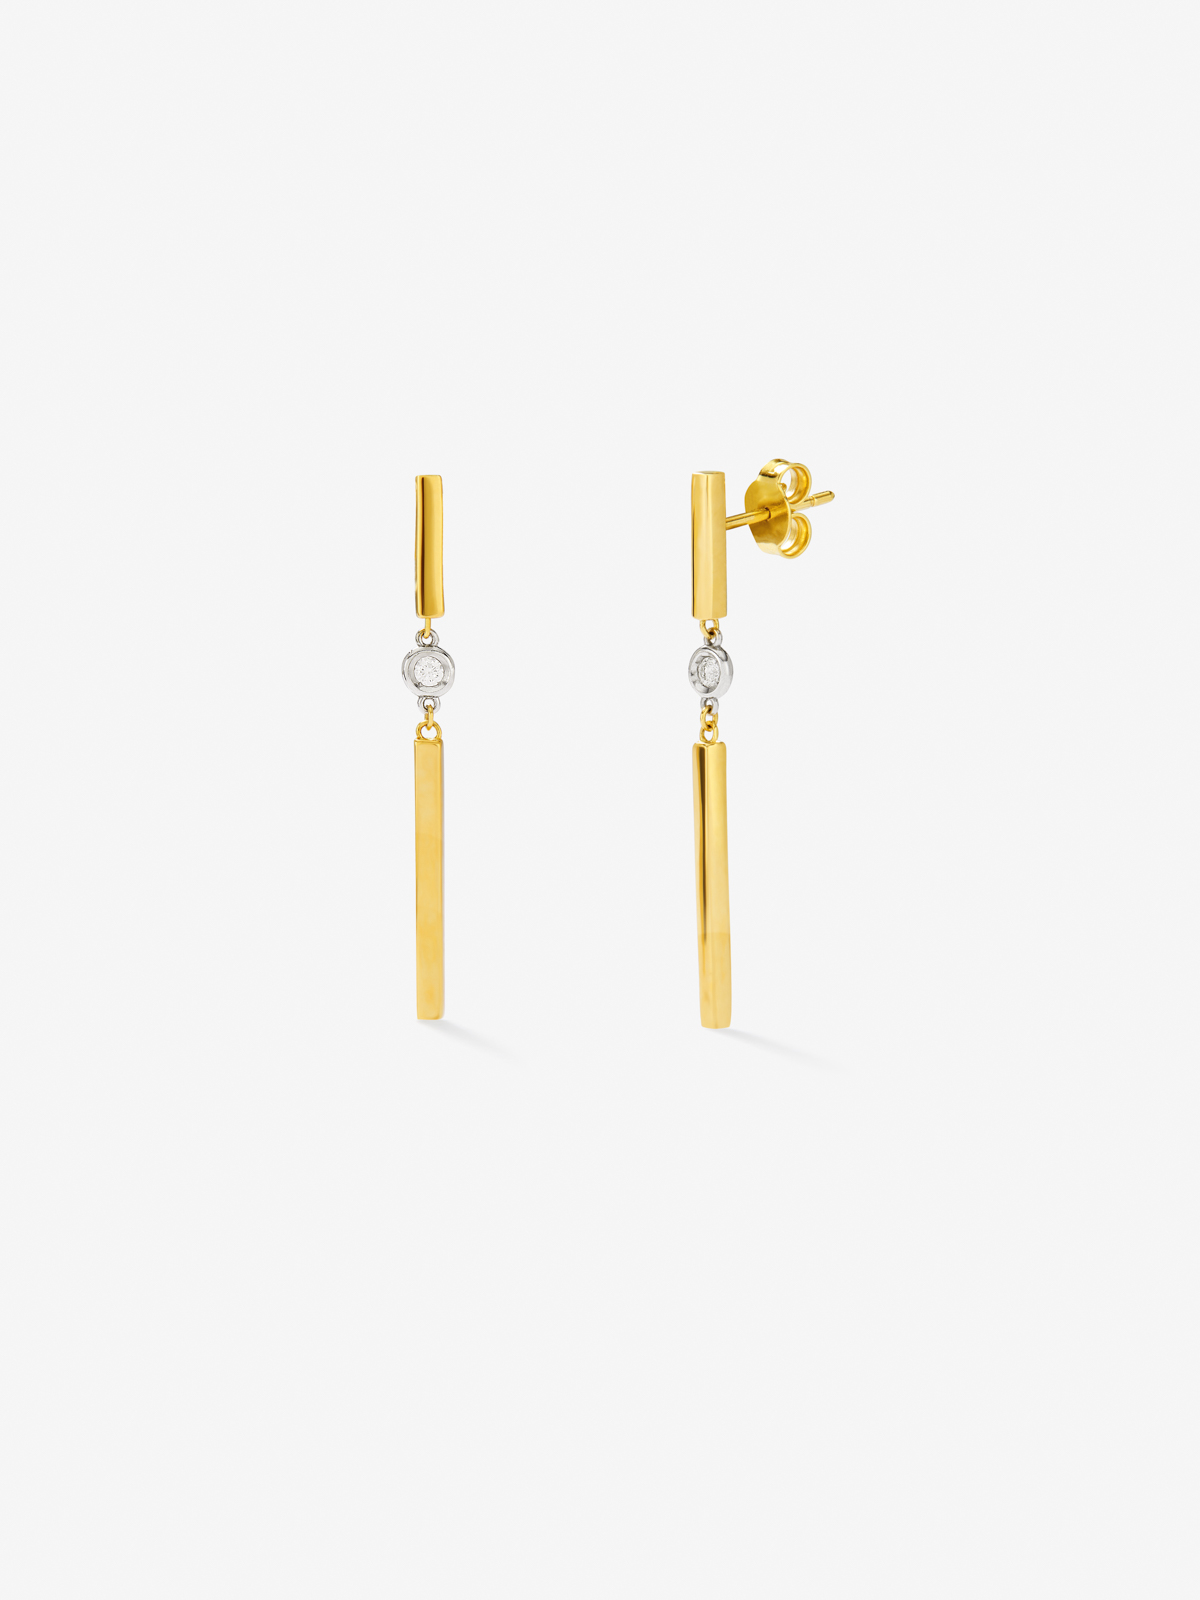 18K yellow gold earrings with 0.07 ct brilliant cut diamonds